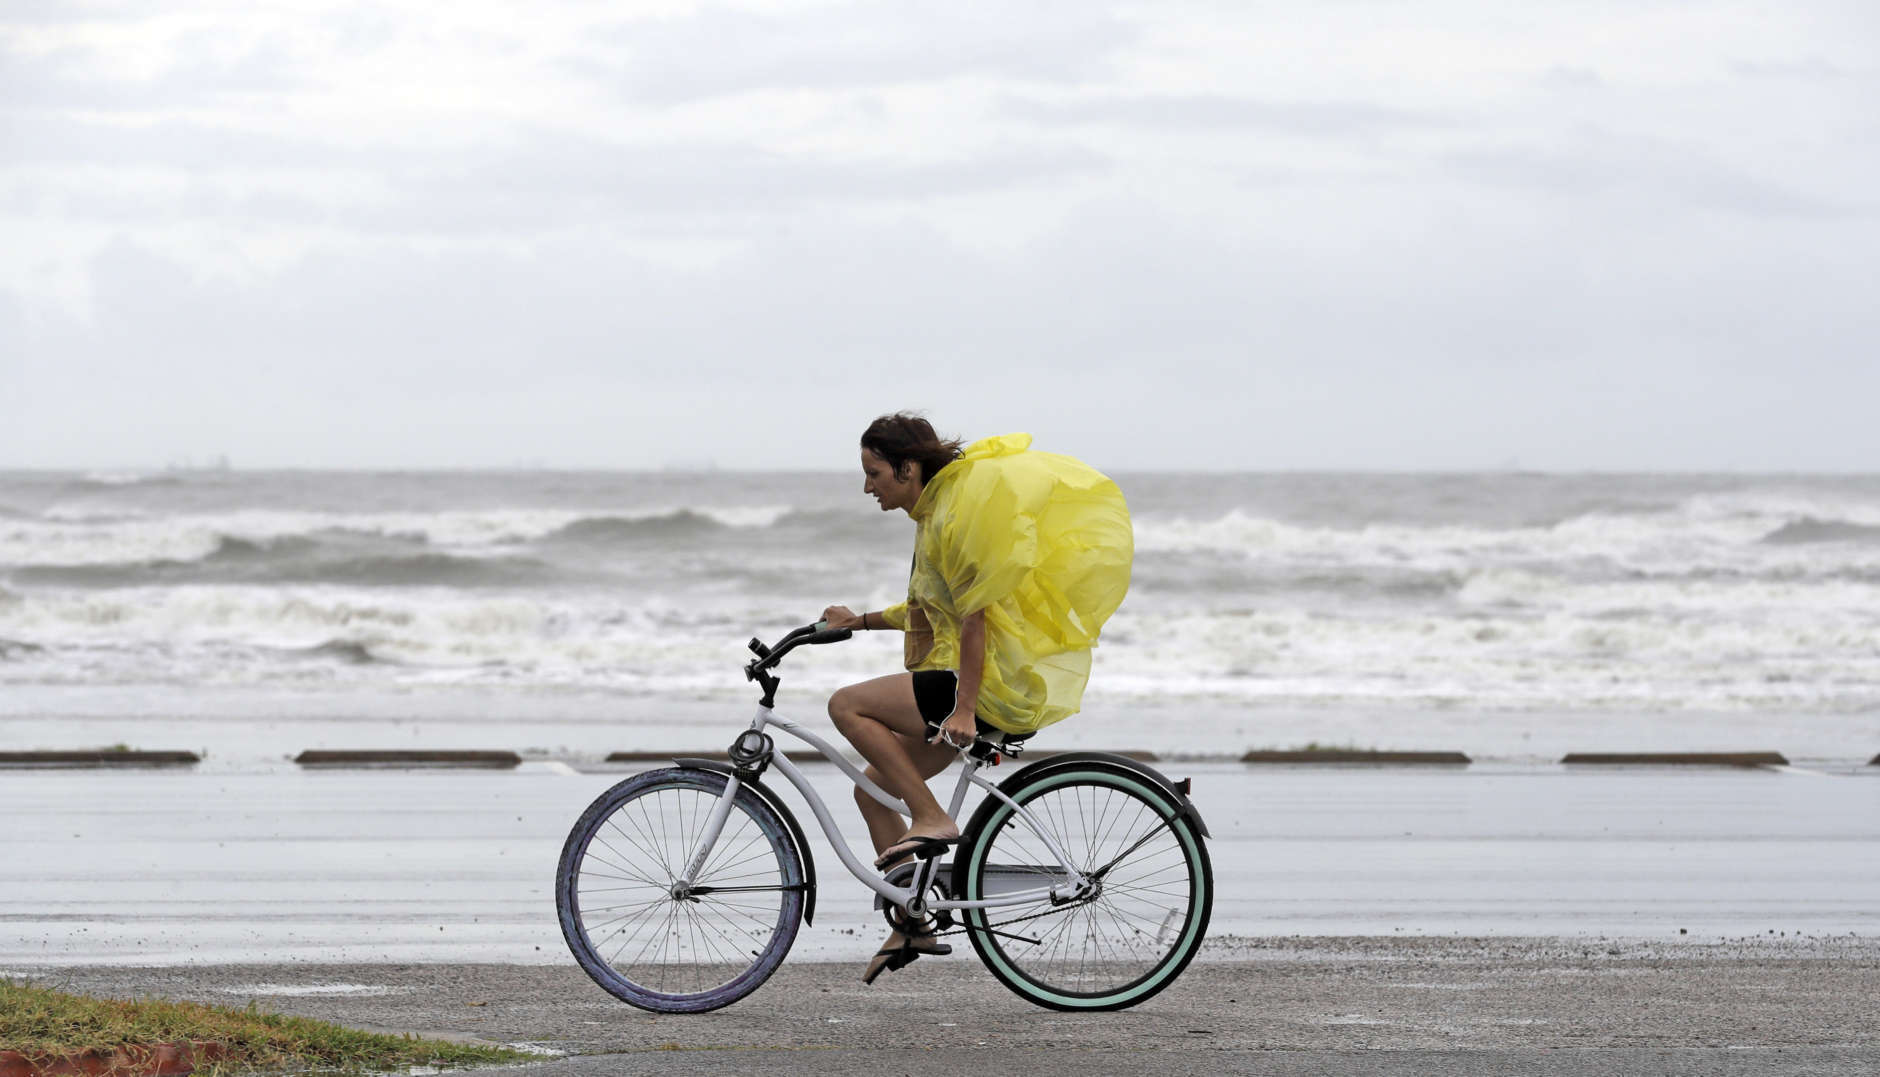 Emma Jewell rides her bicycle along Seawall Blvd. in Galveston, Texas as Hurricane Harvey intensifies in the Gulf of Mexico Friday, Aug. 25, 2017. Harvey is forecast to be a major hurricane when it makes landfall along the middle Texas coastline. (AP Photo/David J. Phillip)